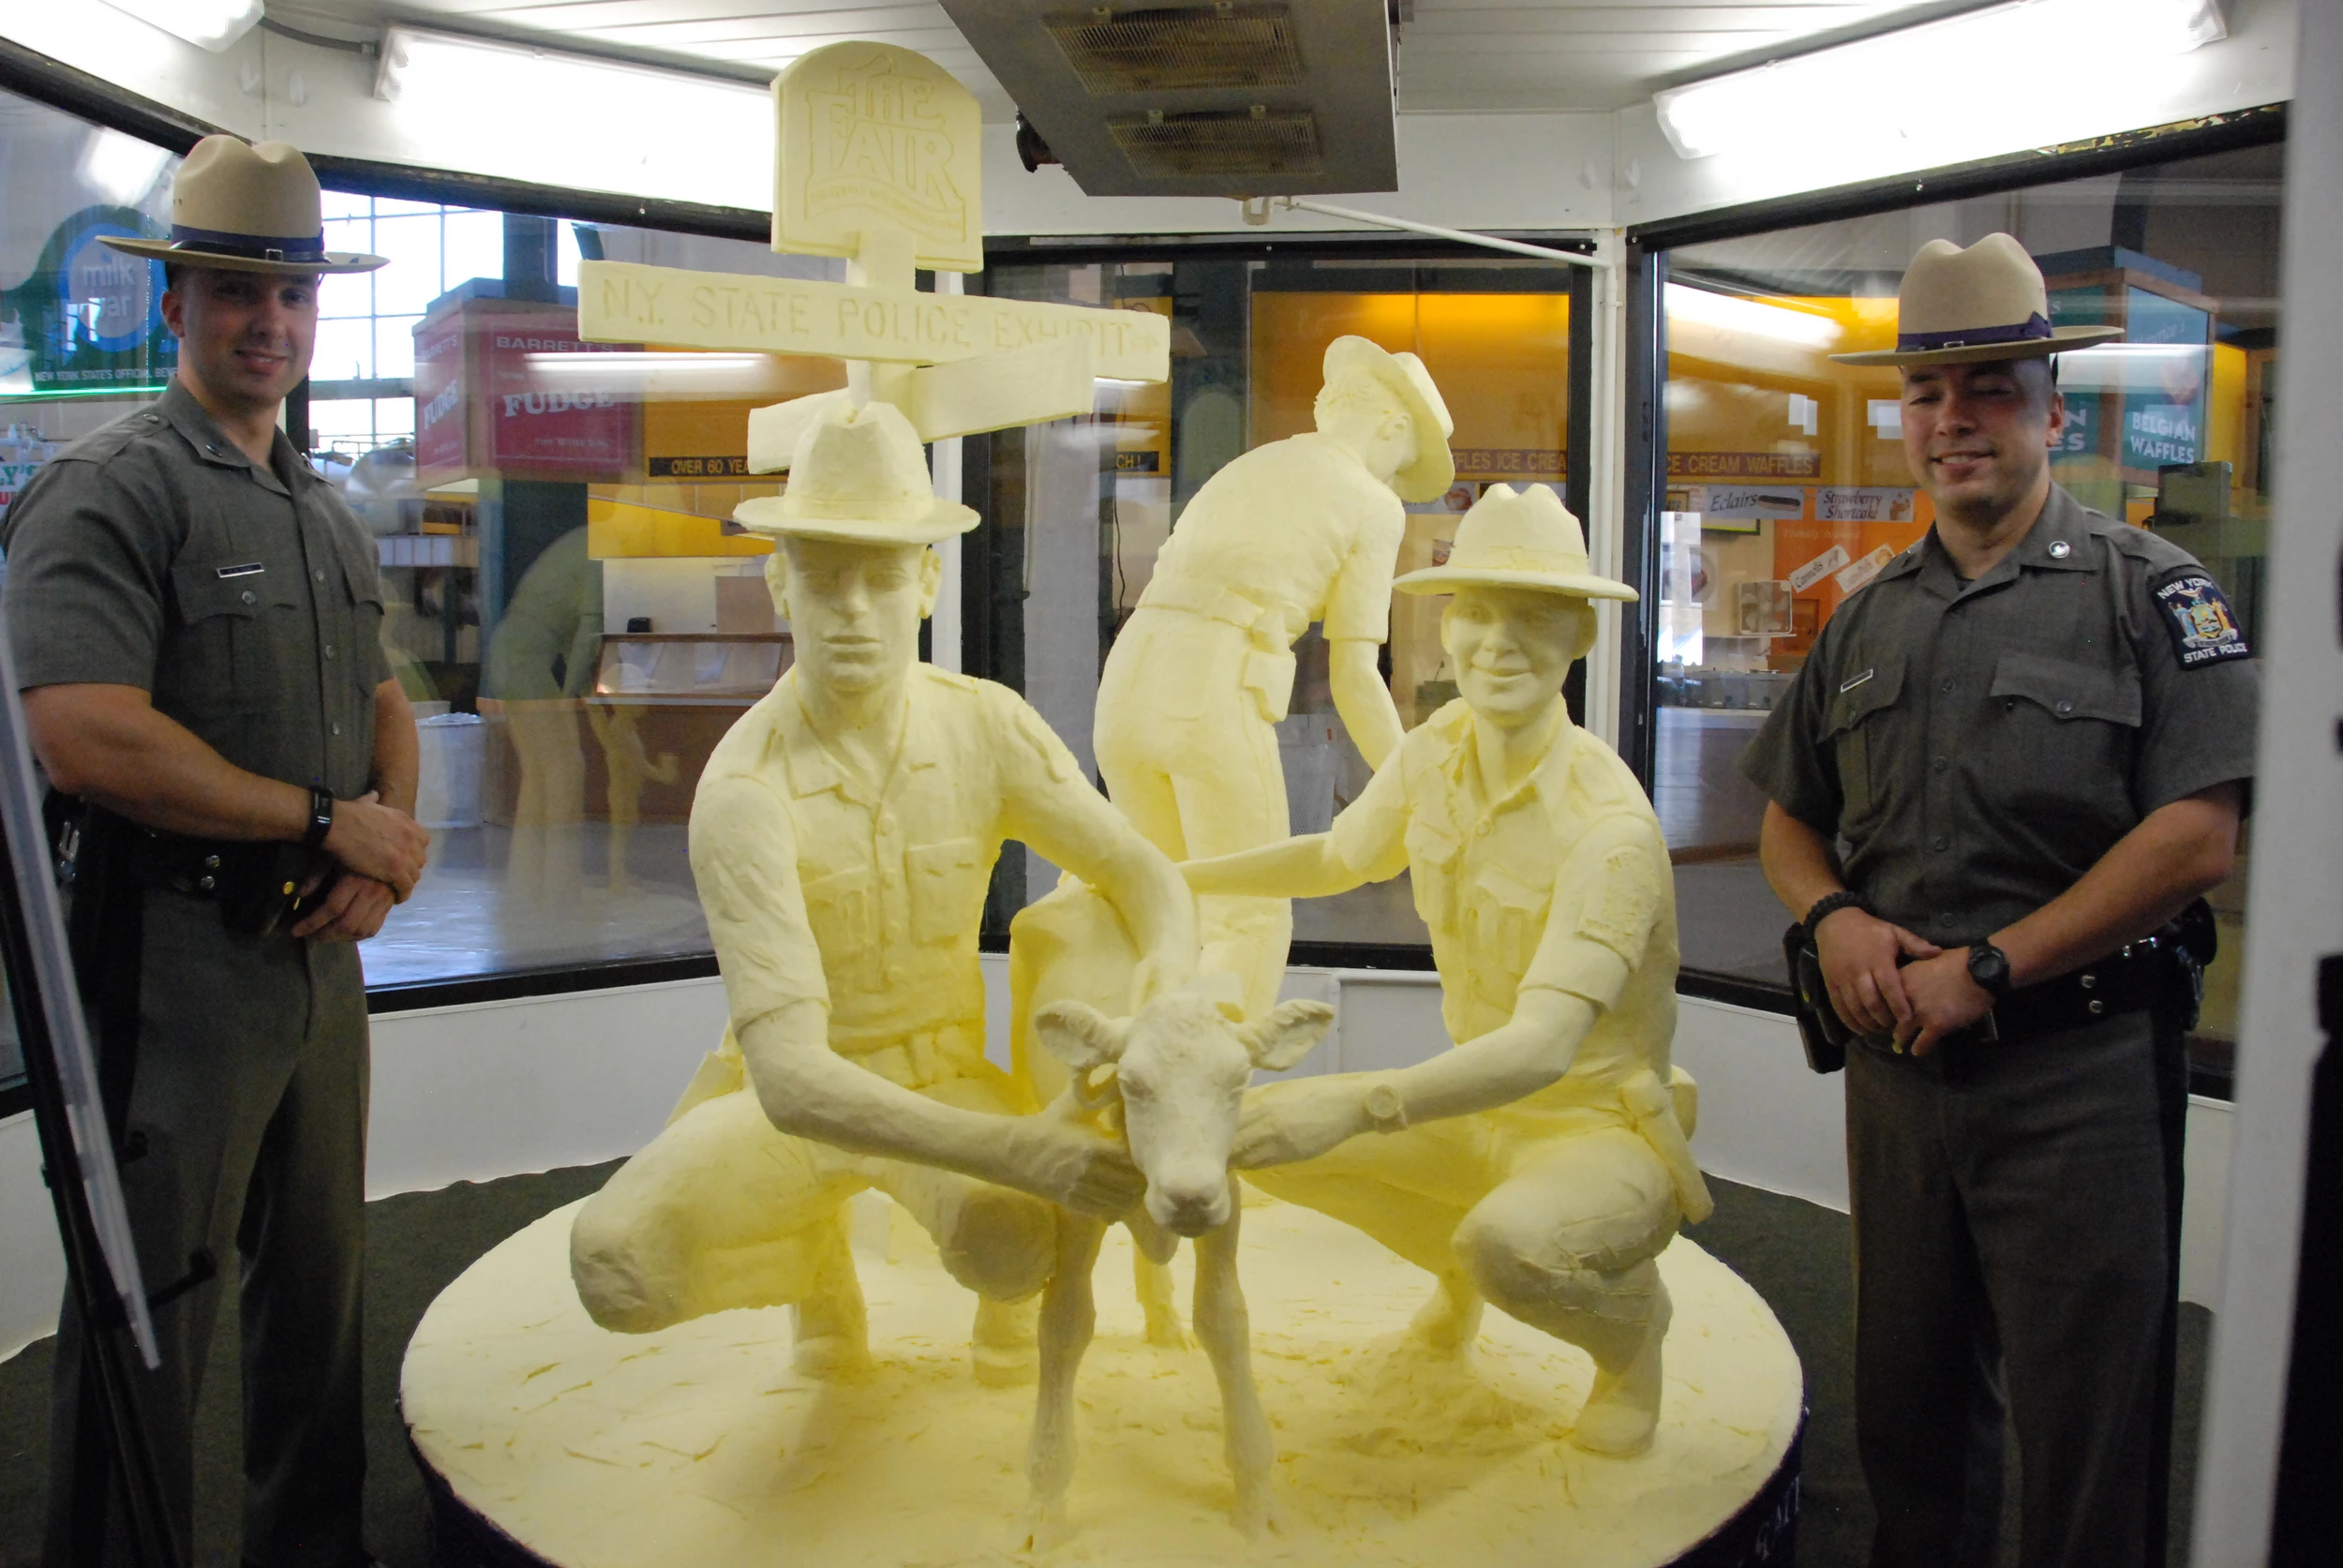 2017 NY State Fair Butter Sculpture 'Salutes' NYS Troopers